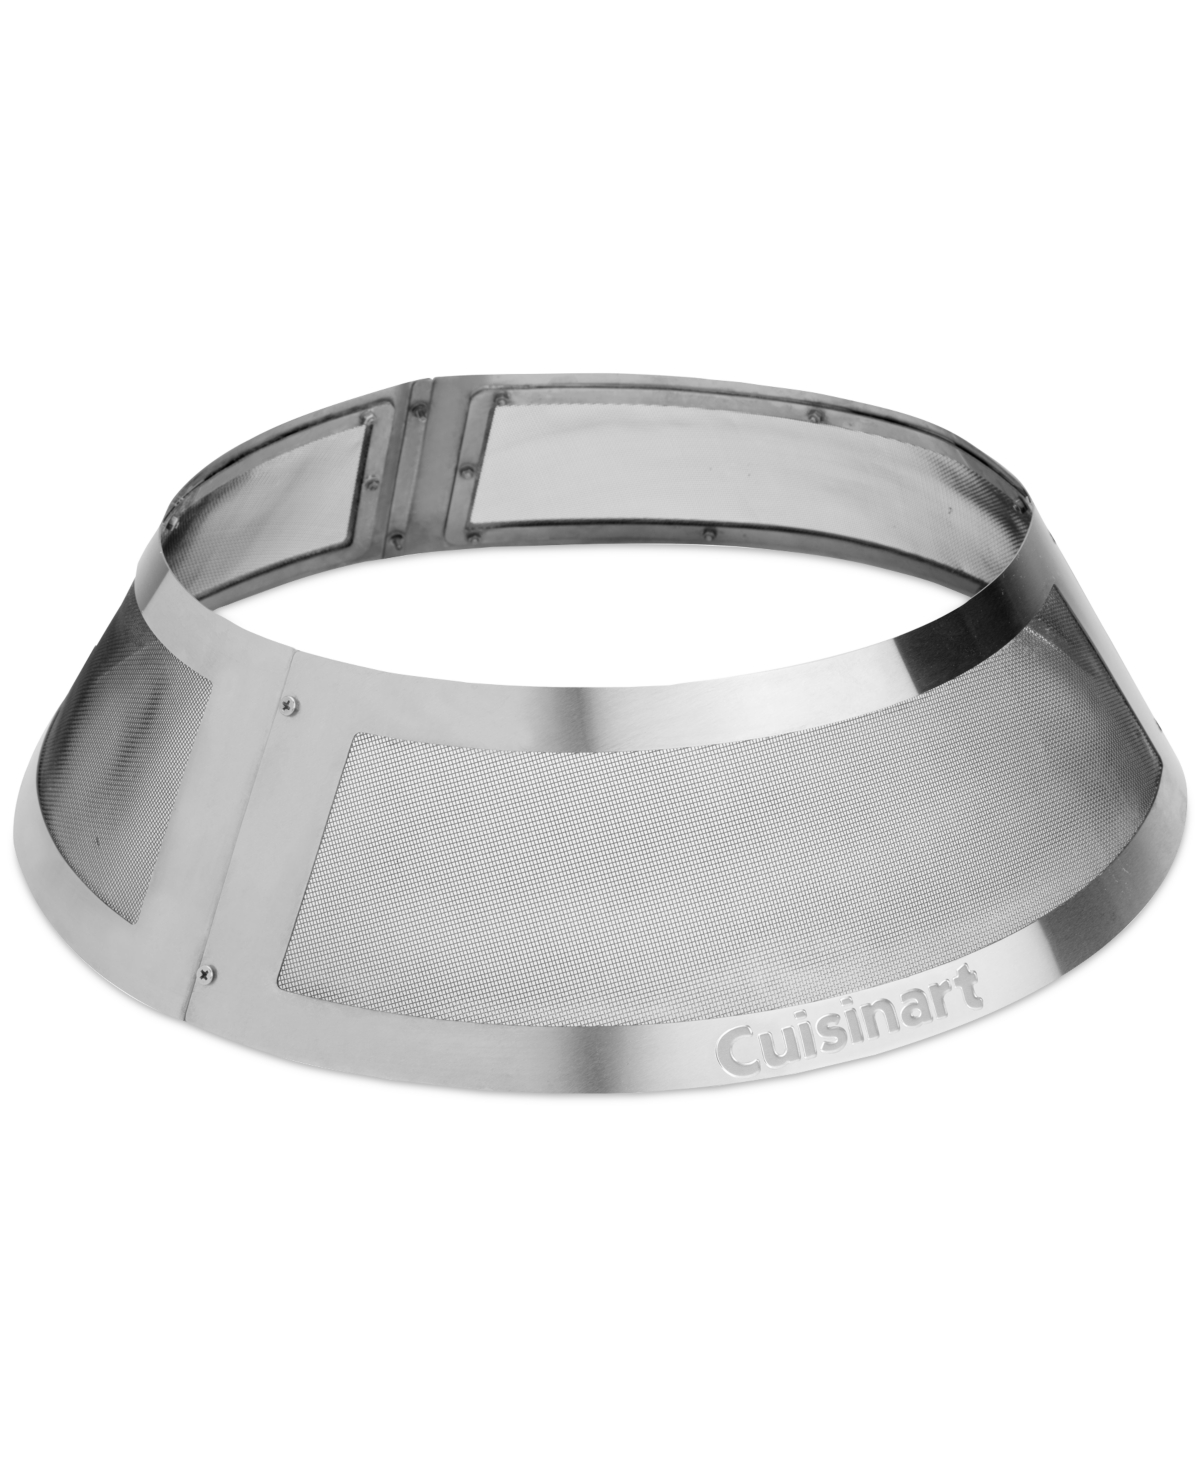 Cuisinart Cleanburn Stainless Steel Fire Pit Spark Guard